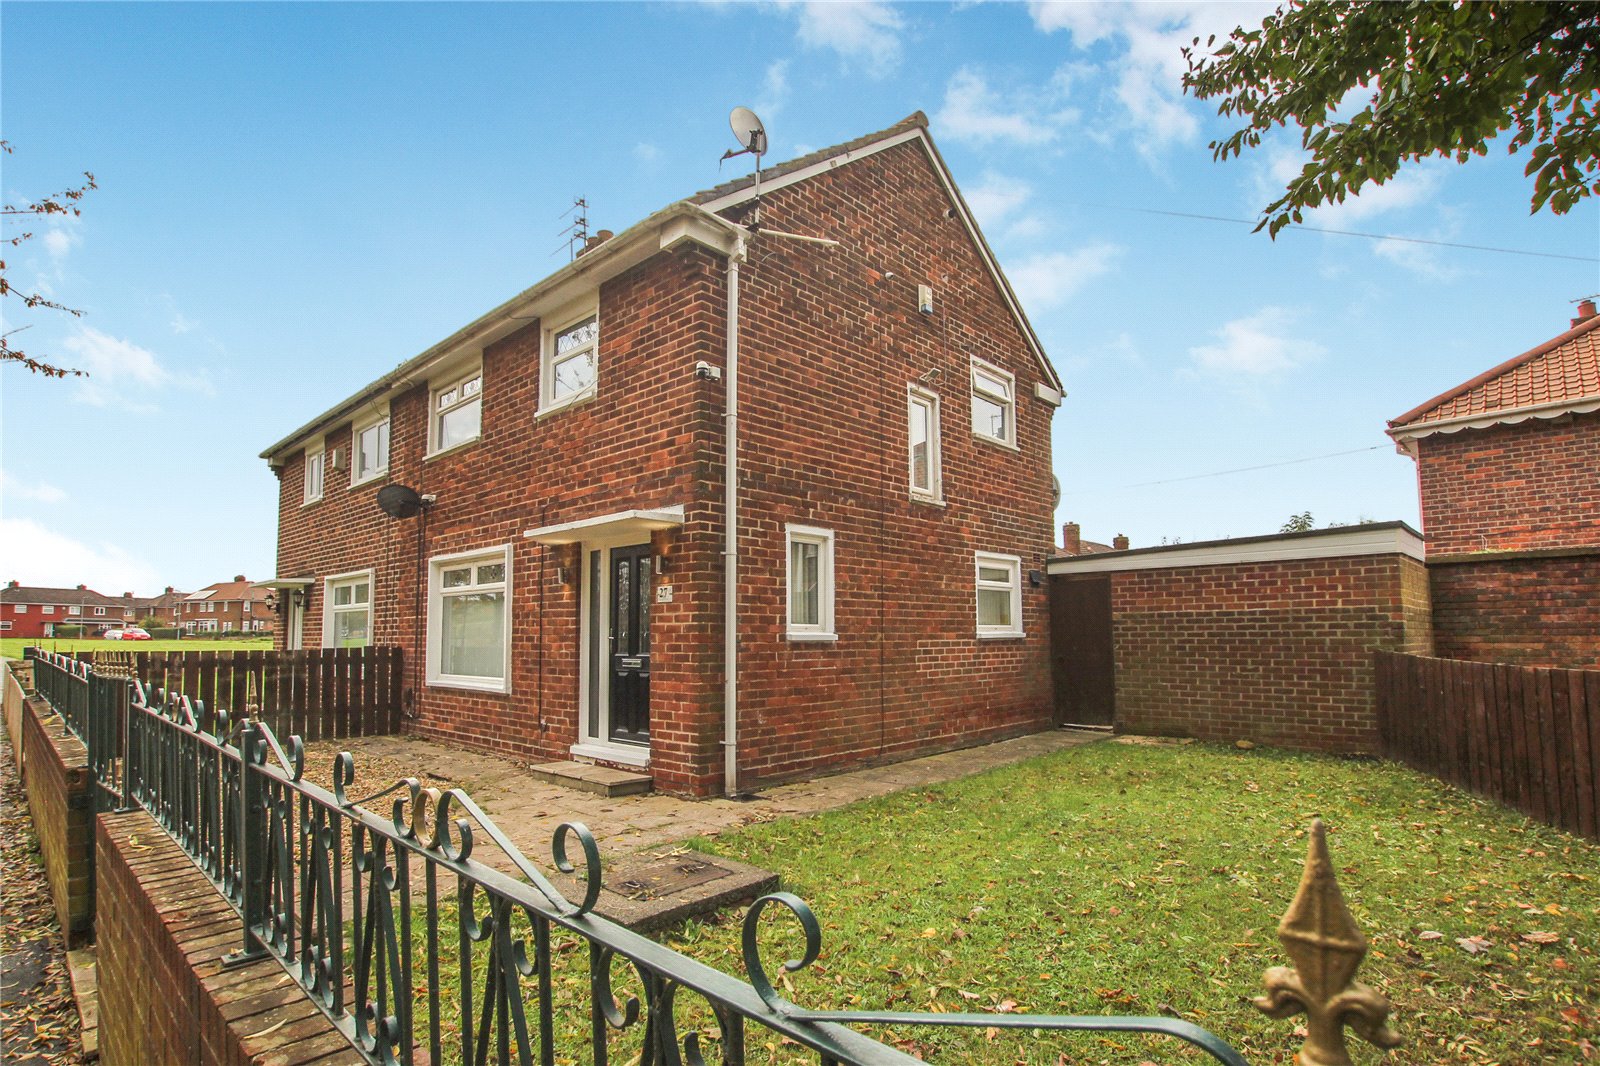 3 bed  for sale in Kelvin Grove, Park End  - Property Image 1